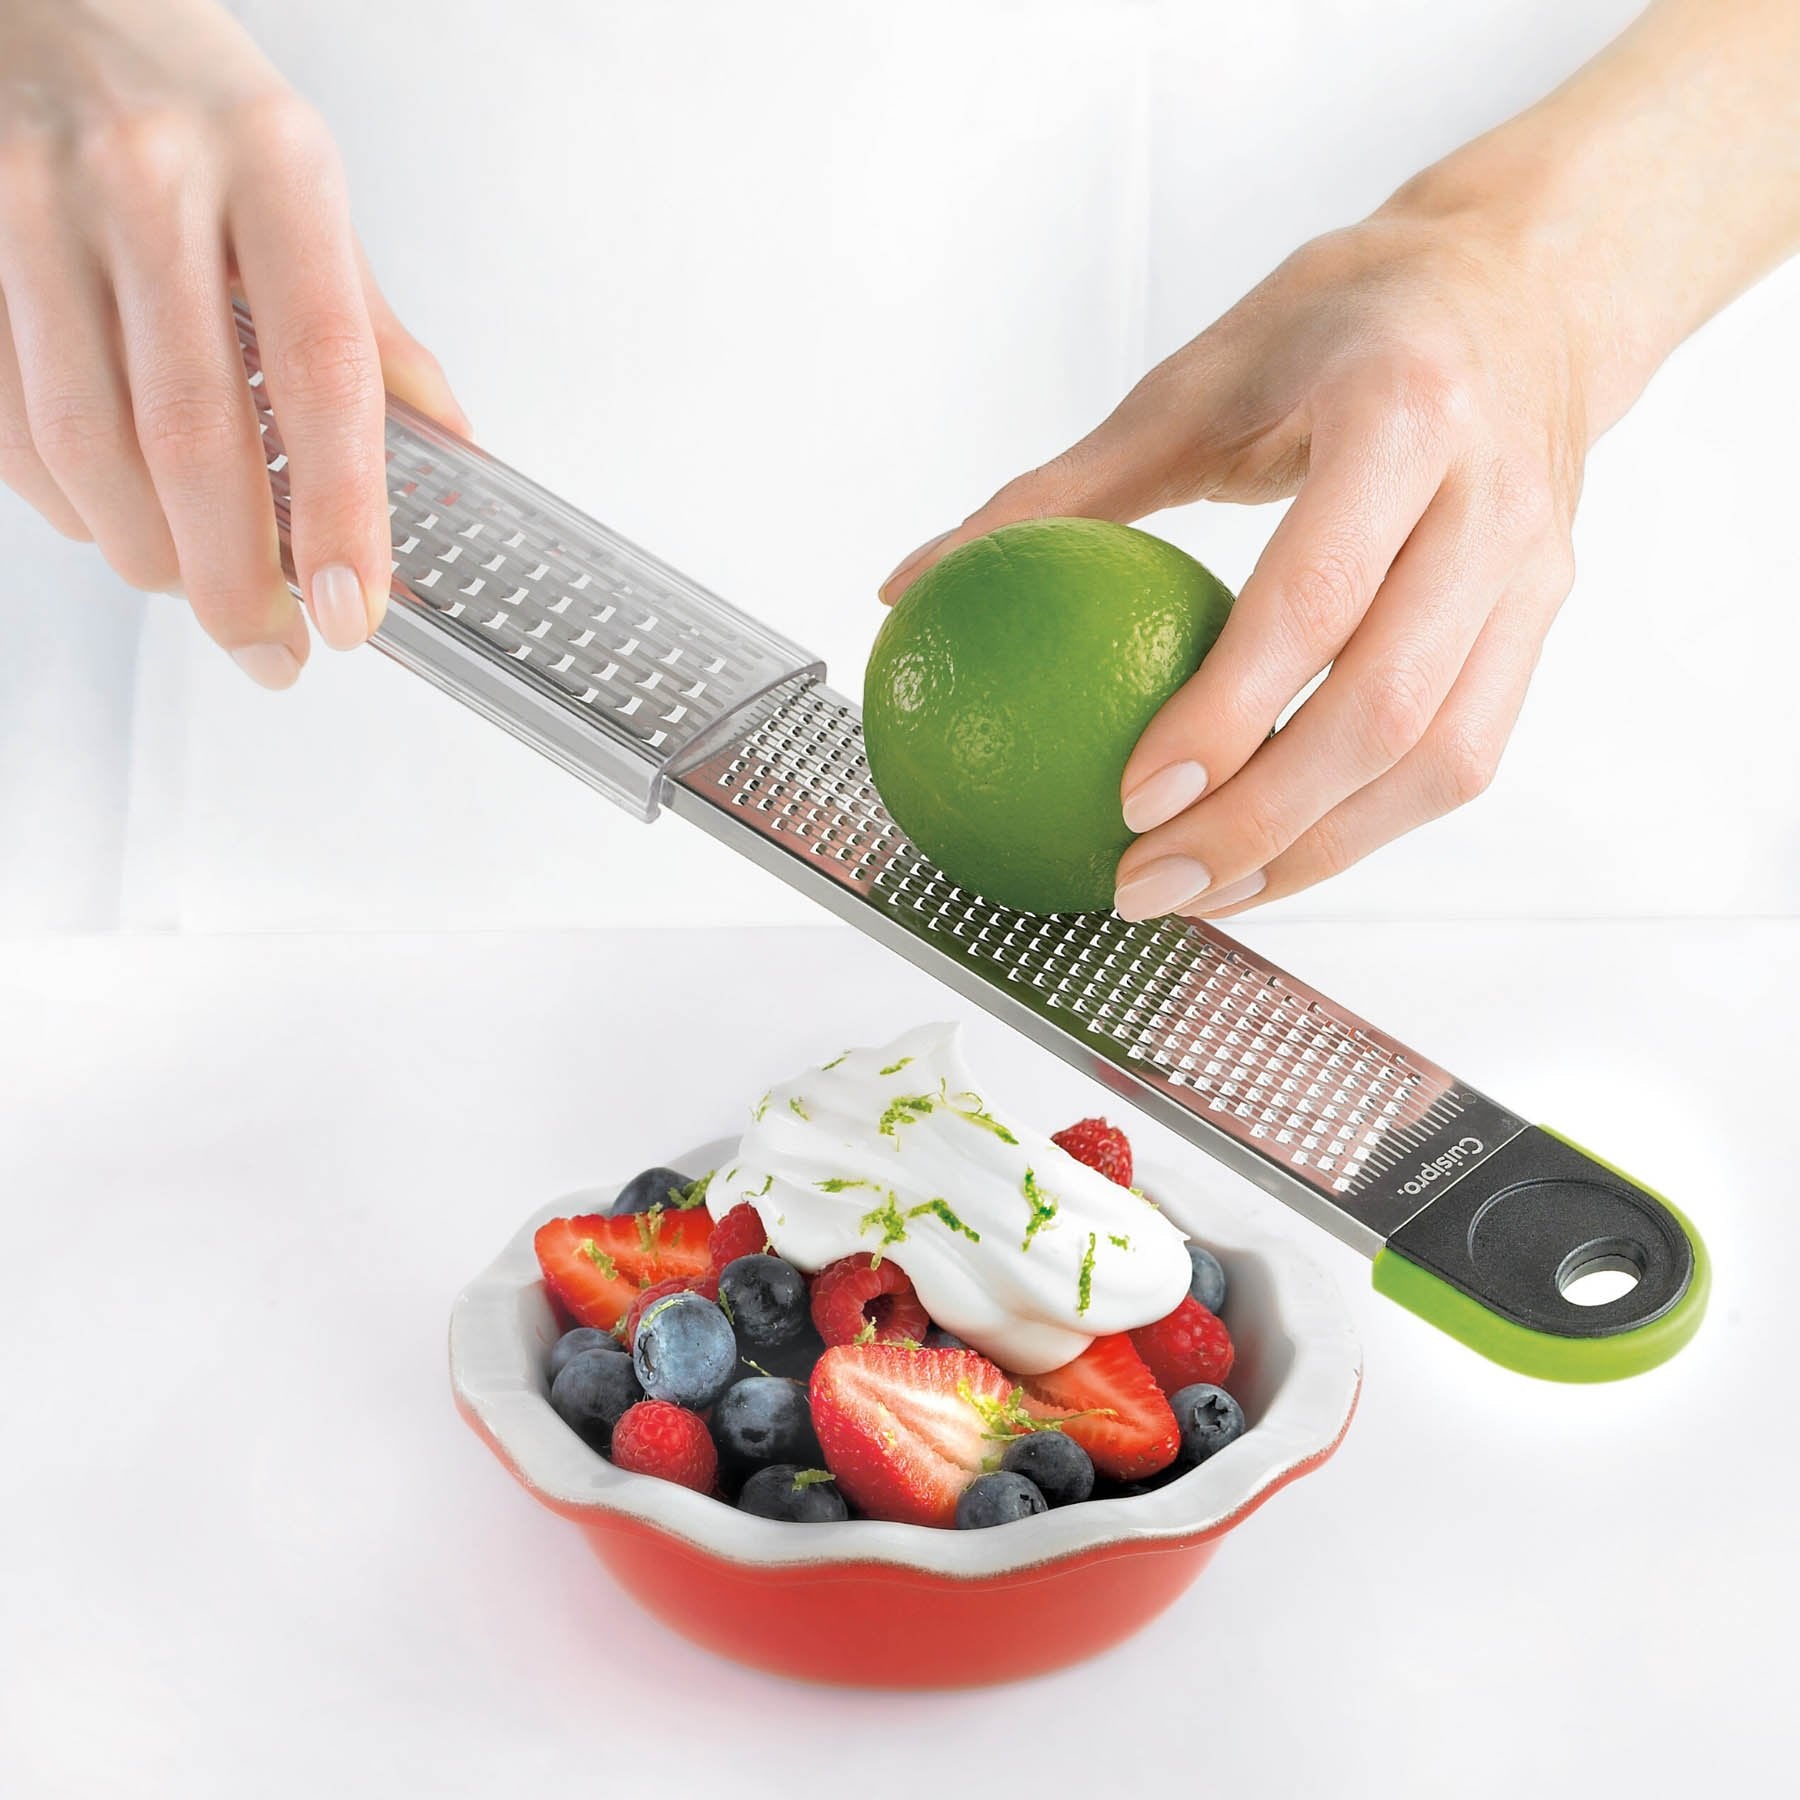 Universal Stainless Steel Grater Parmesan Grater Non-slip Square